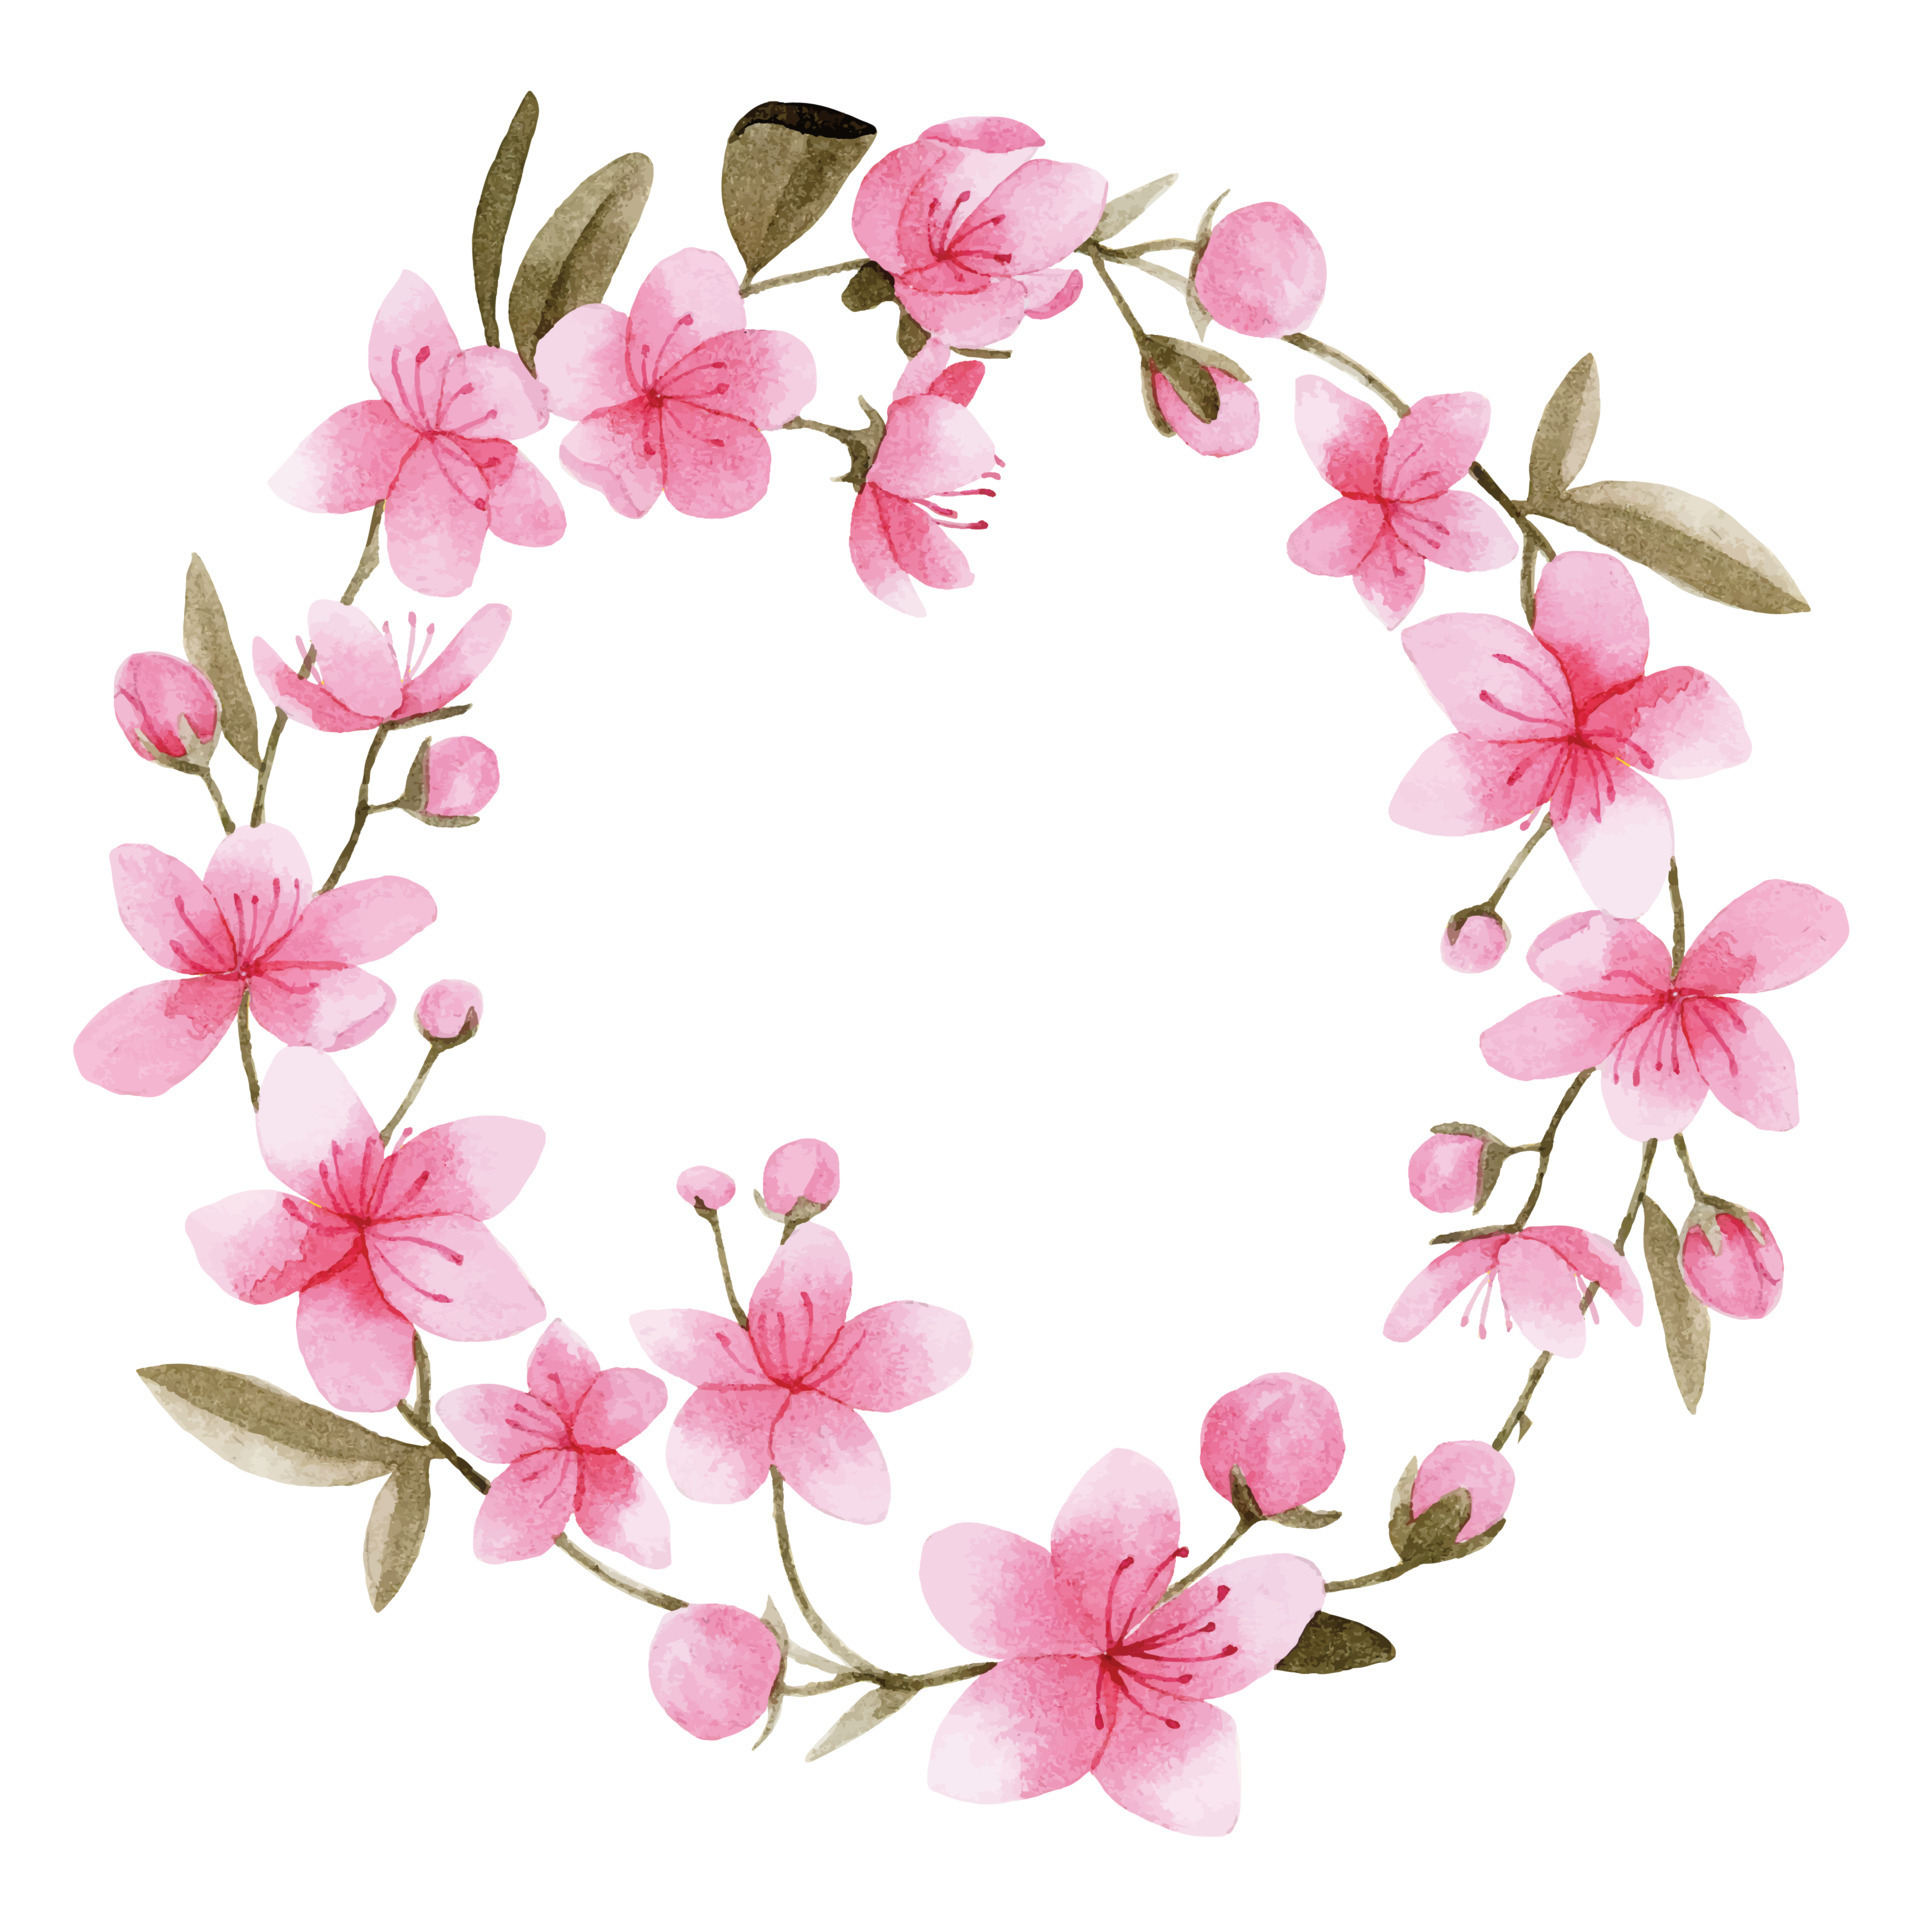 Apple, Cherry Pink Flowers. Seamless Floral Stripe Frame